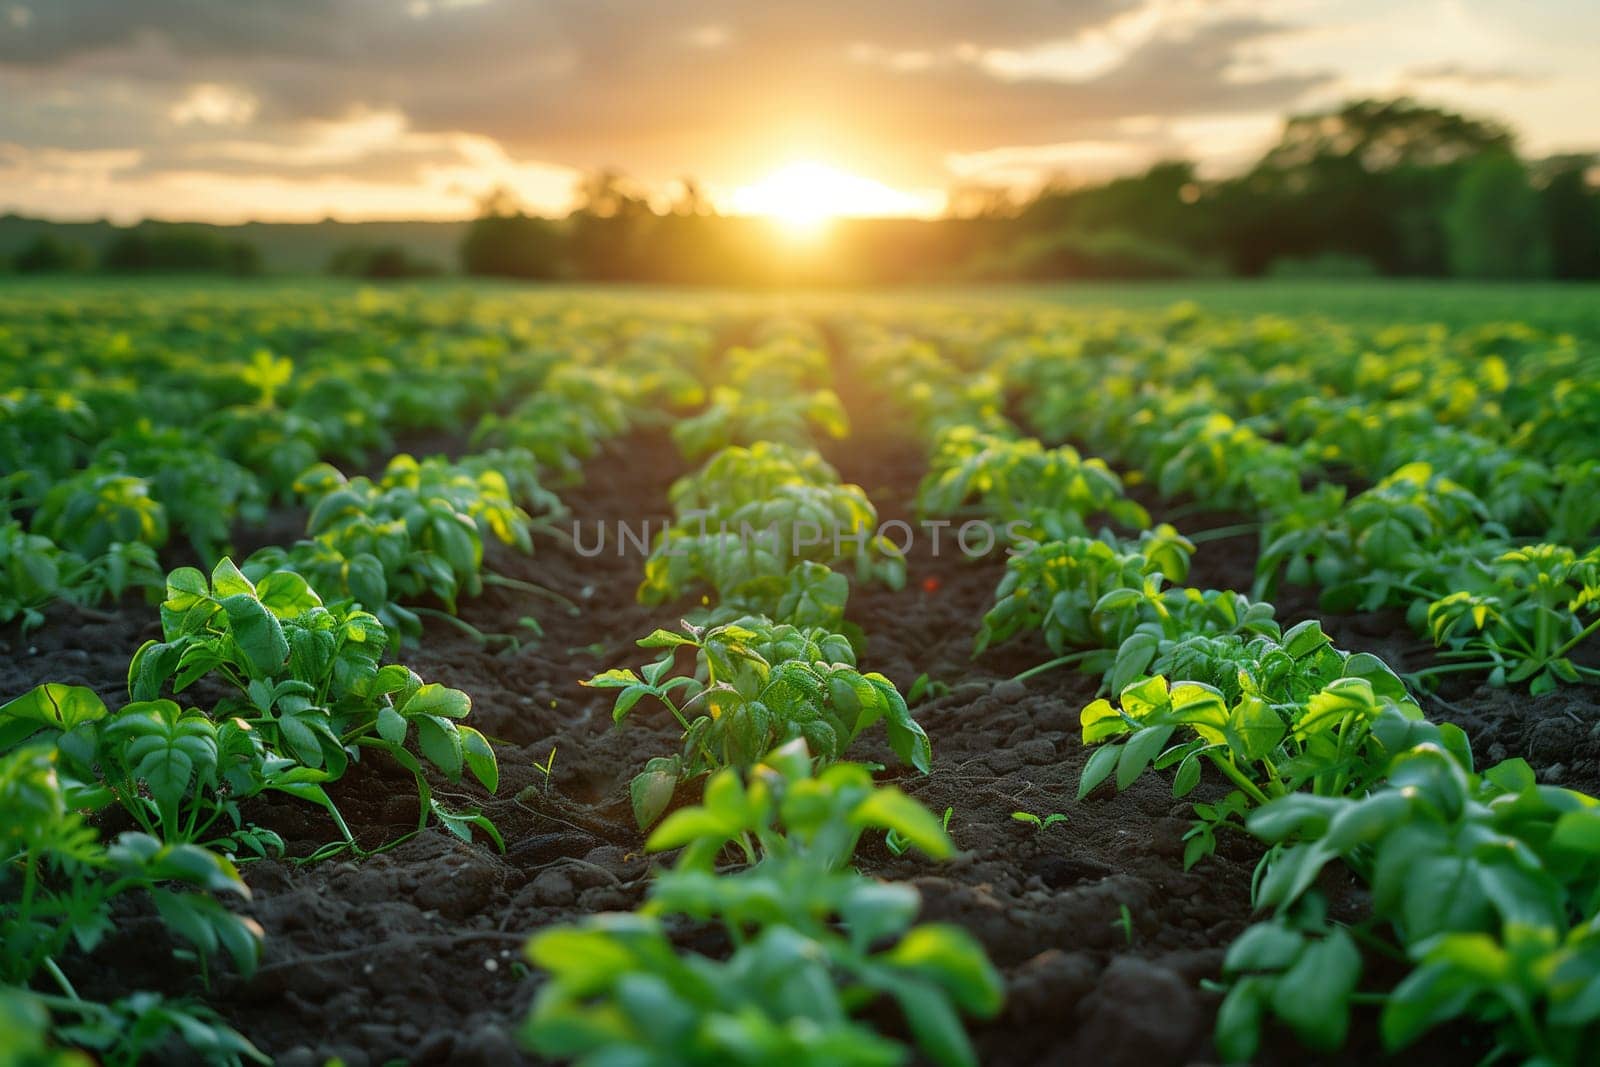 The sun slowly setting behind a vast field of lush green plants, creating a natural and serene scene.